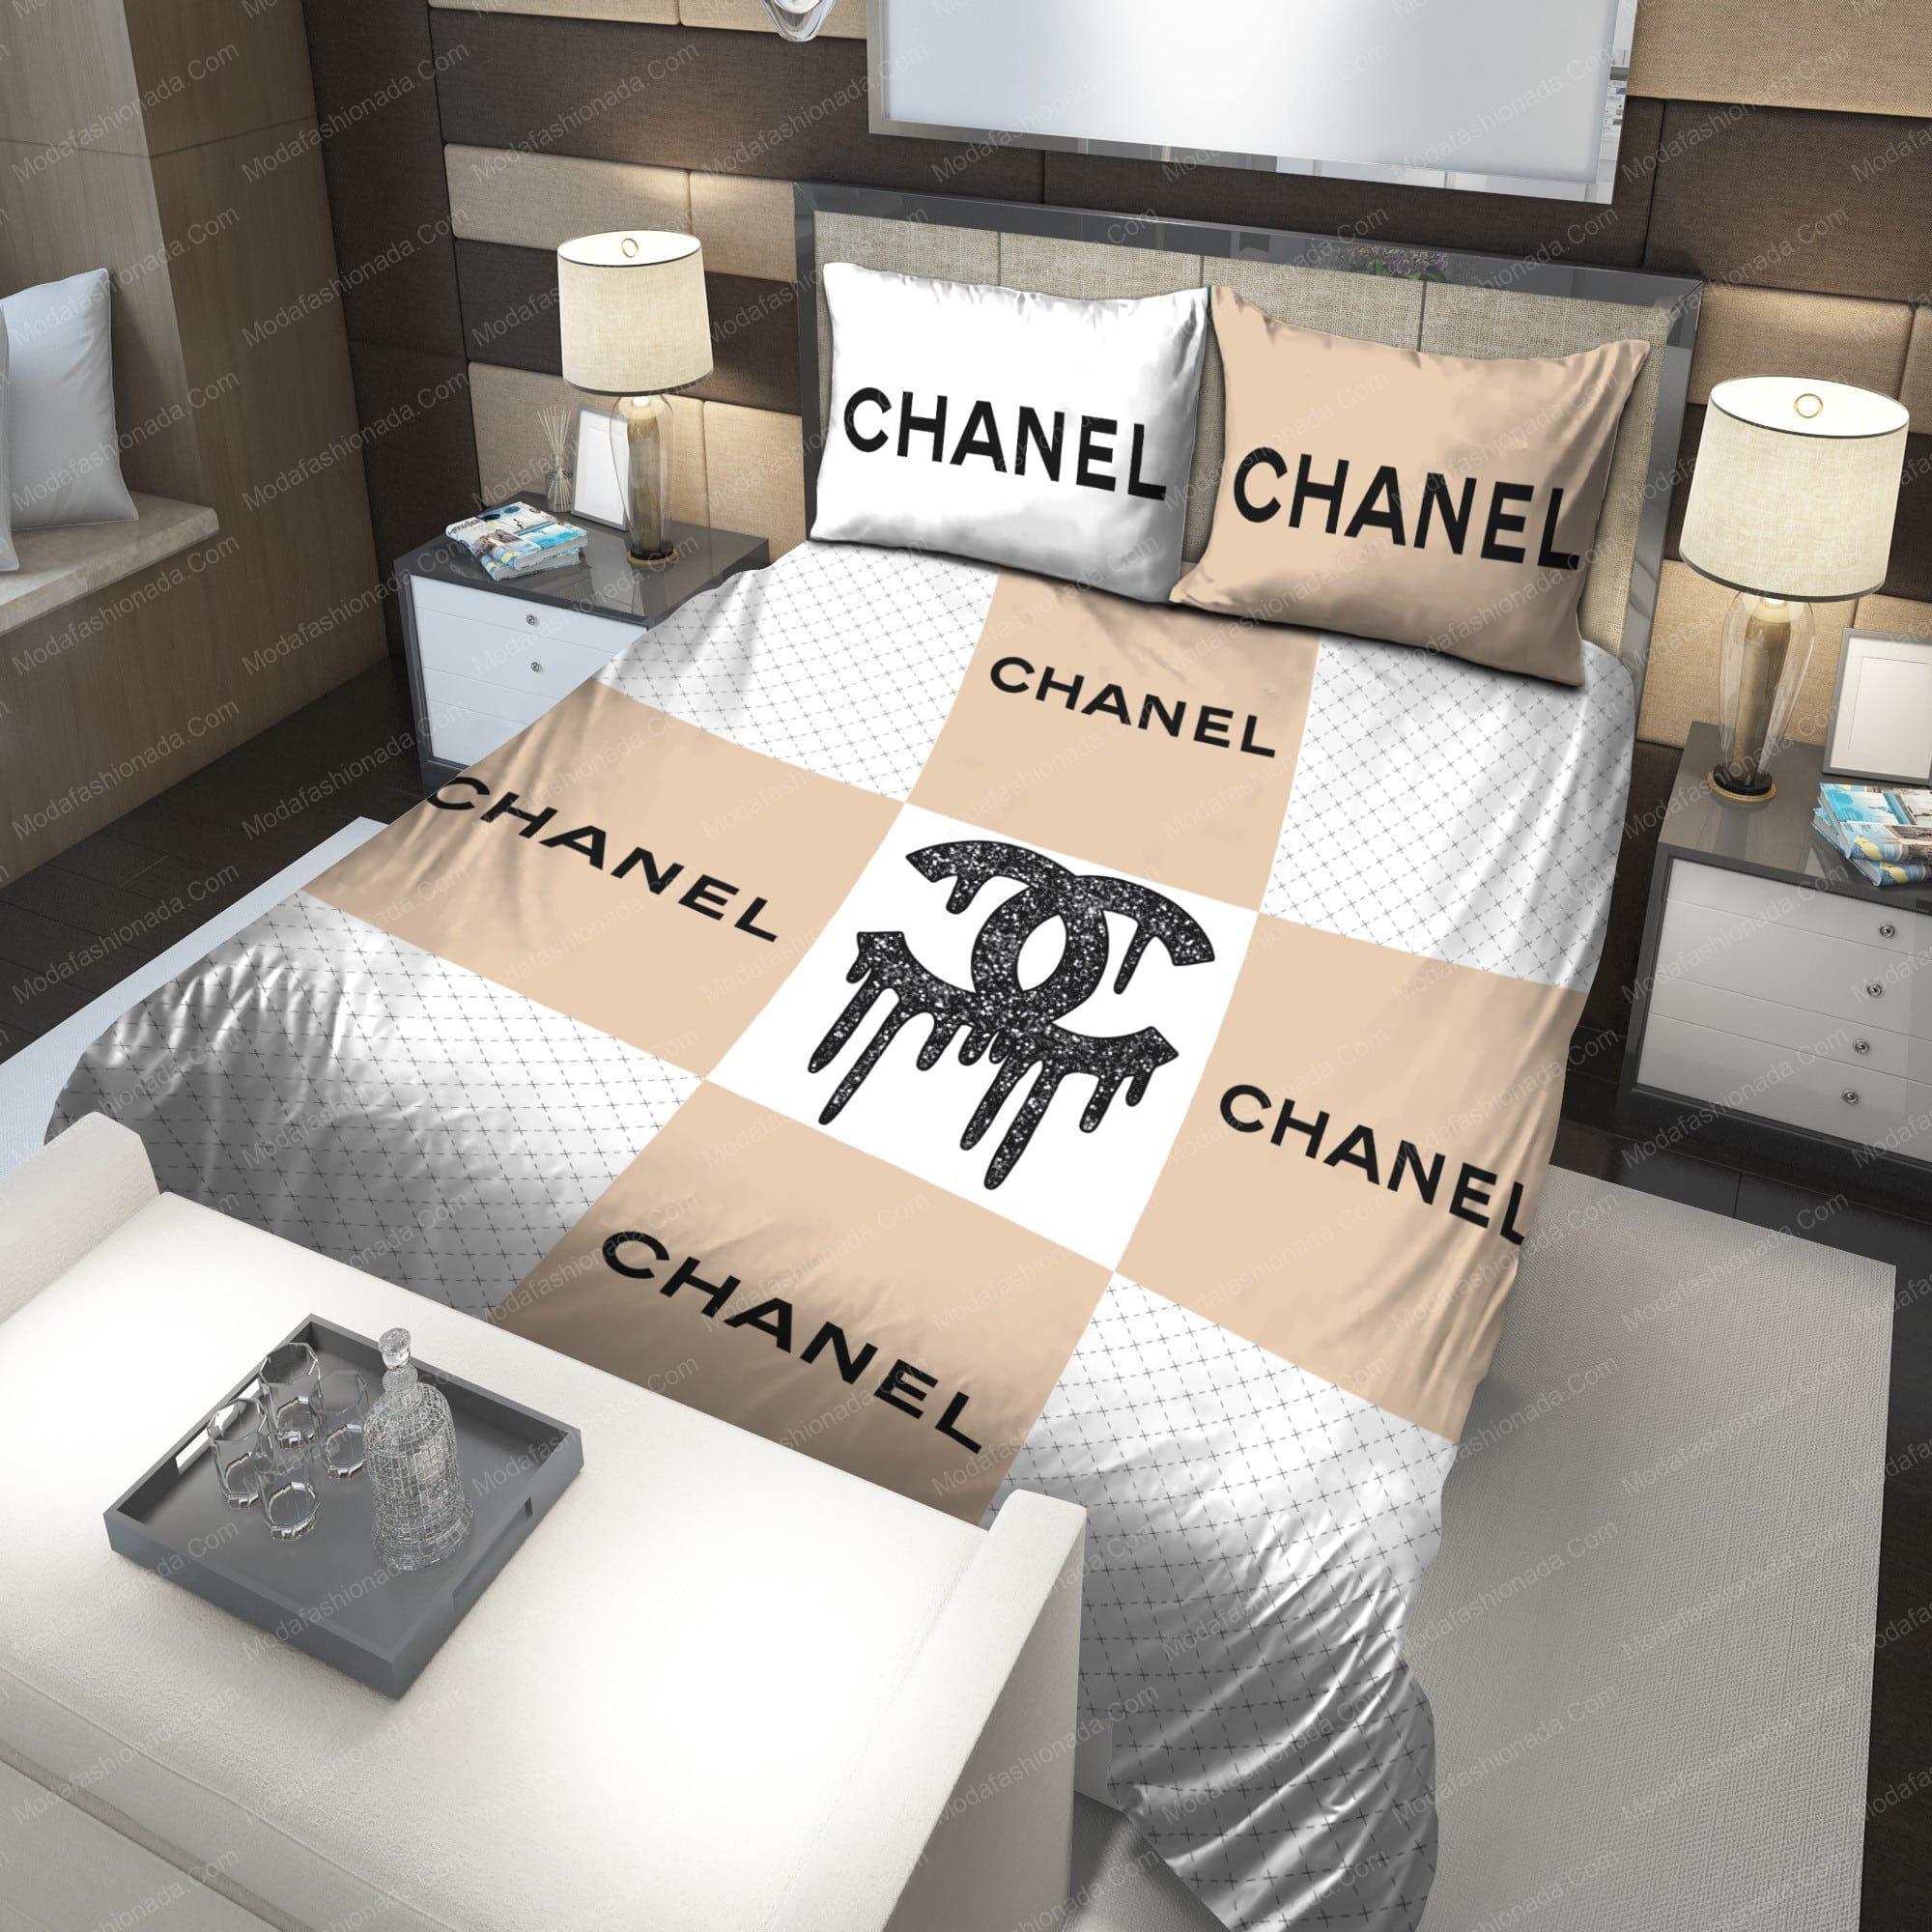 Channel bedding sets! #Channel #bed